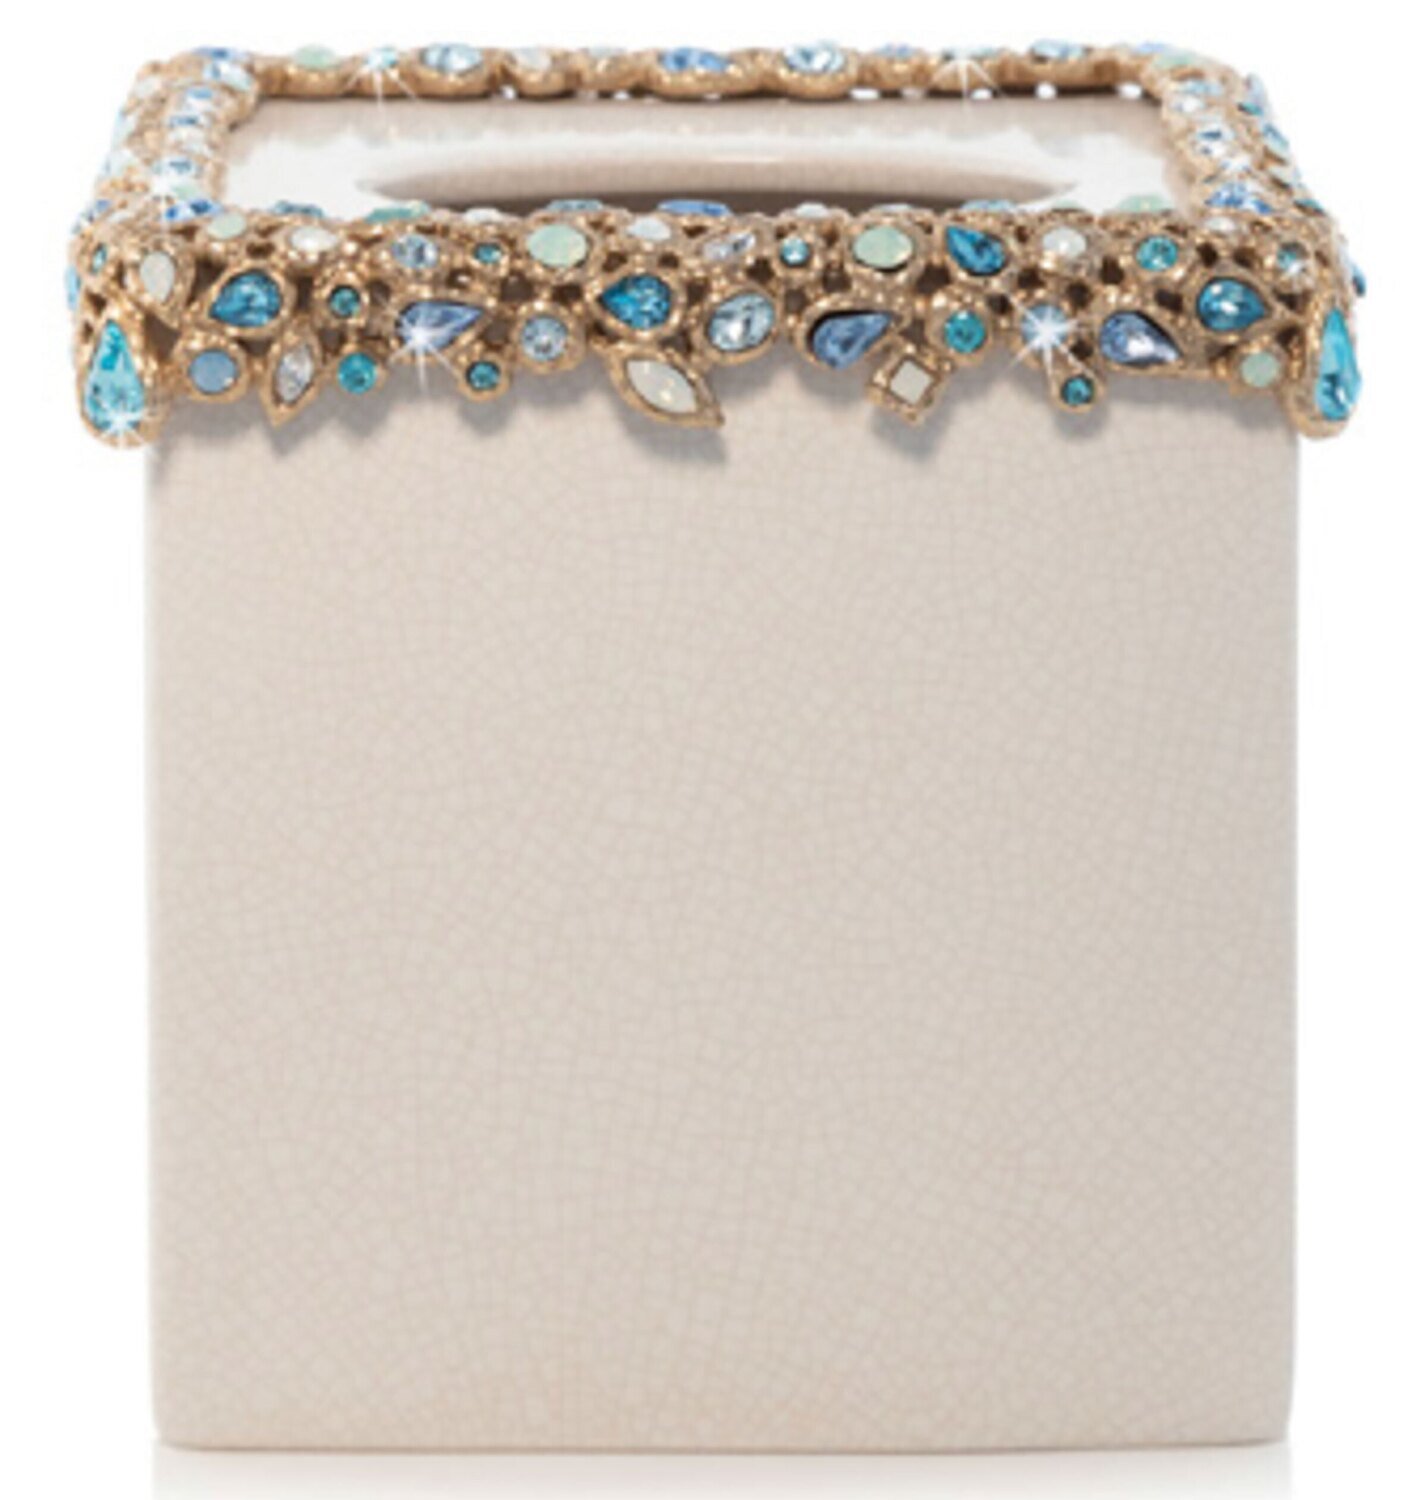 Jay Strongwater Emerson Bejeweled Tissue Box Oceana SDH8891-230